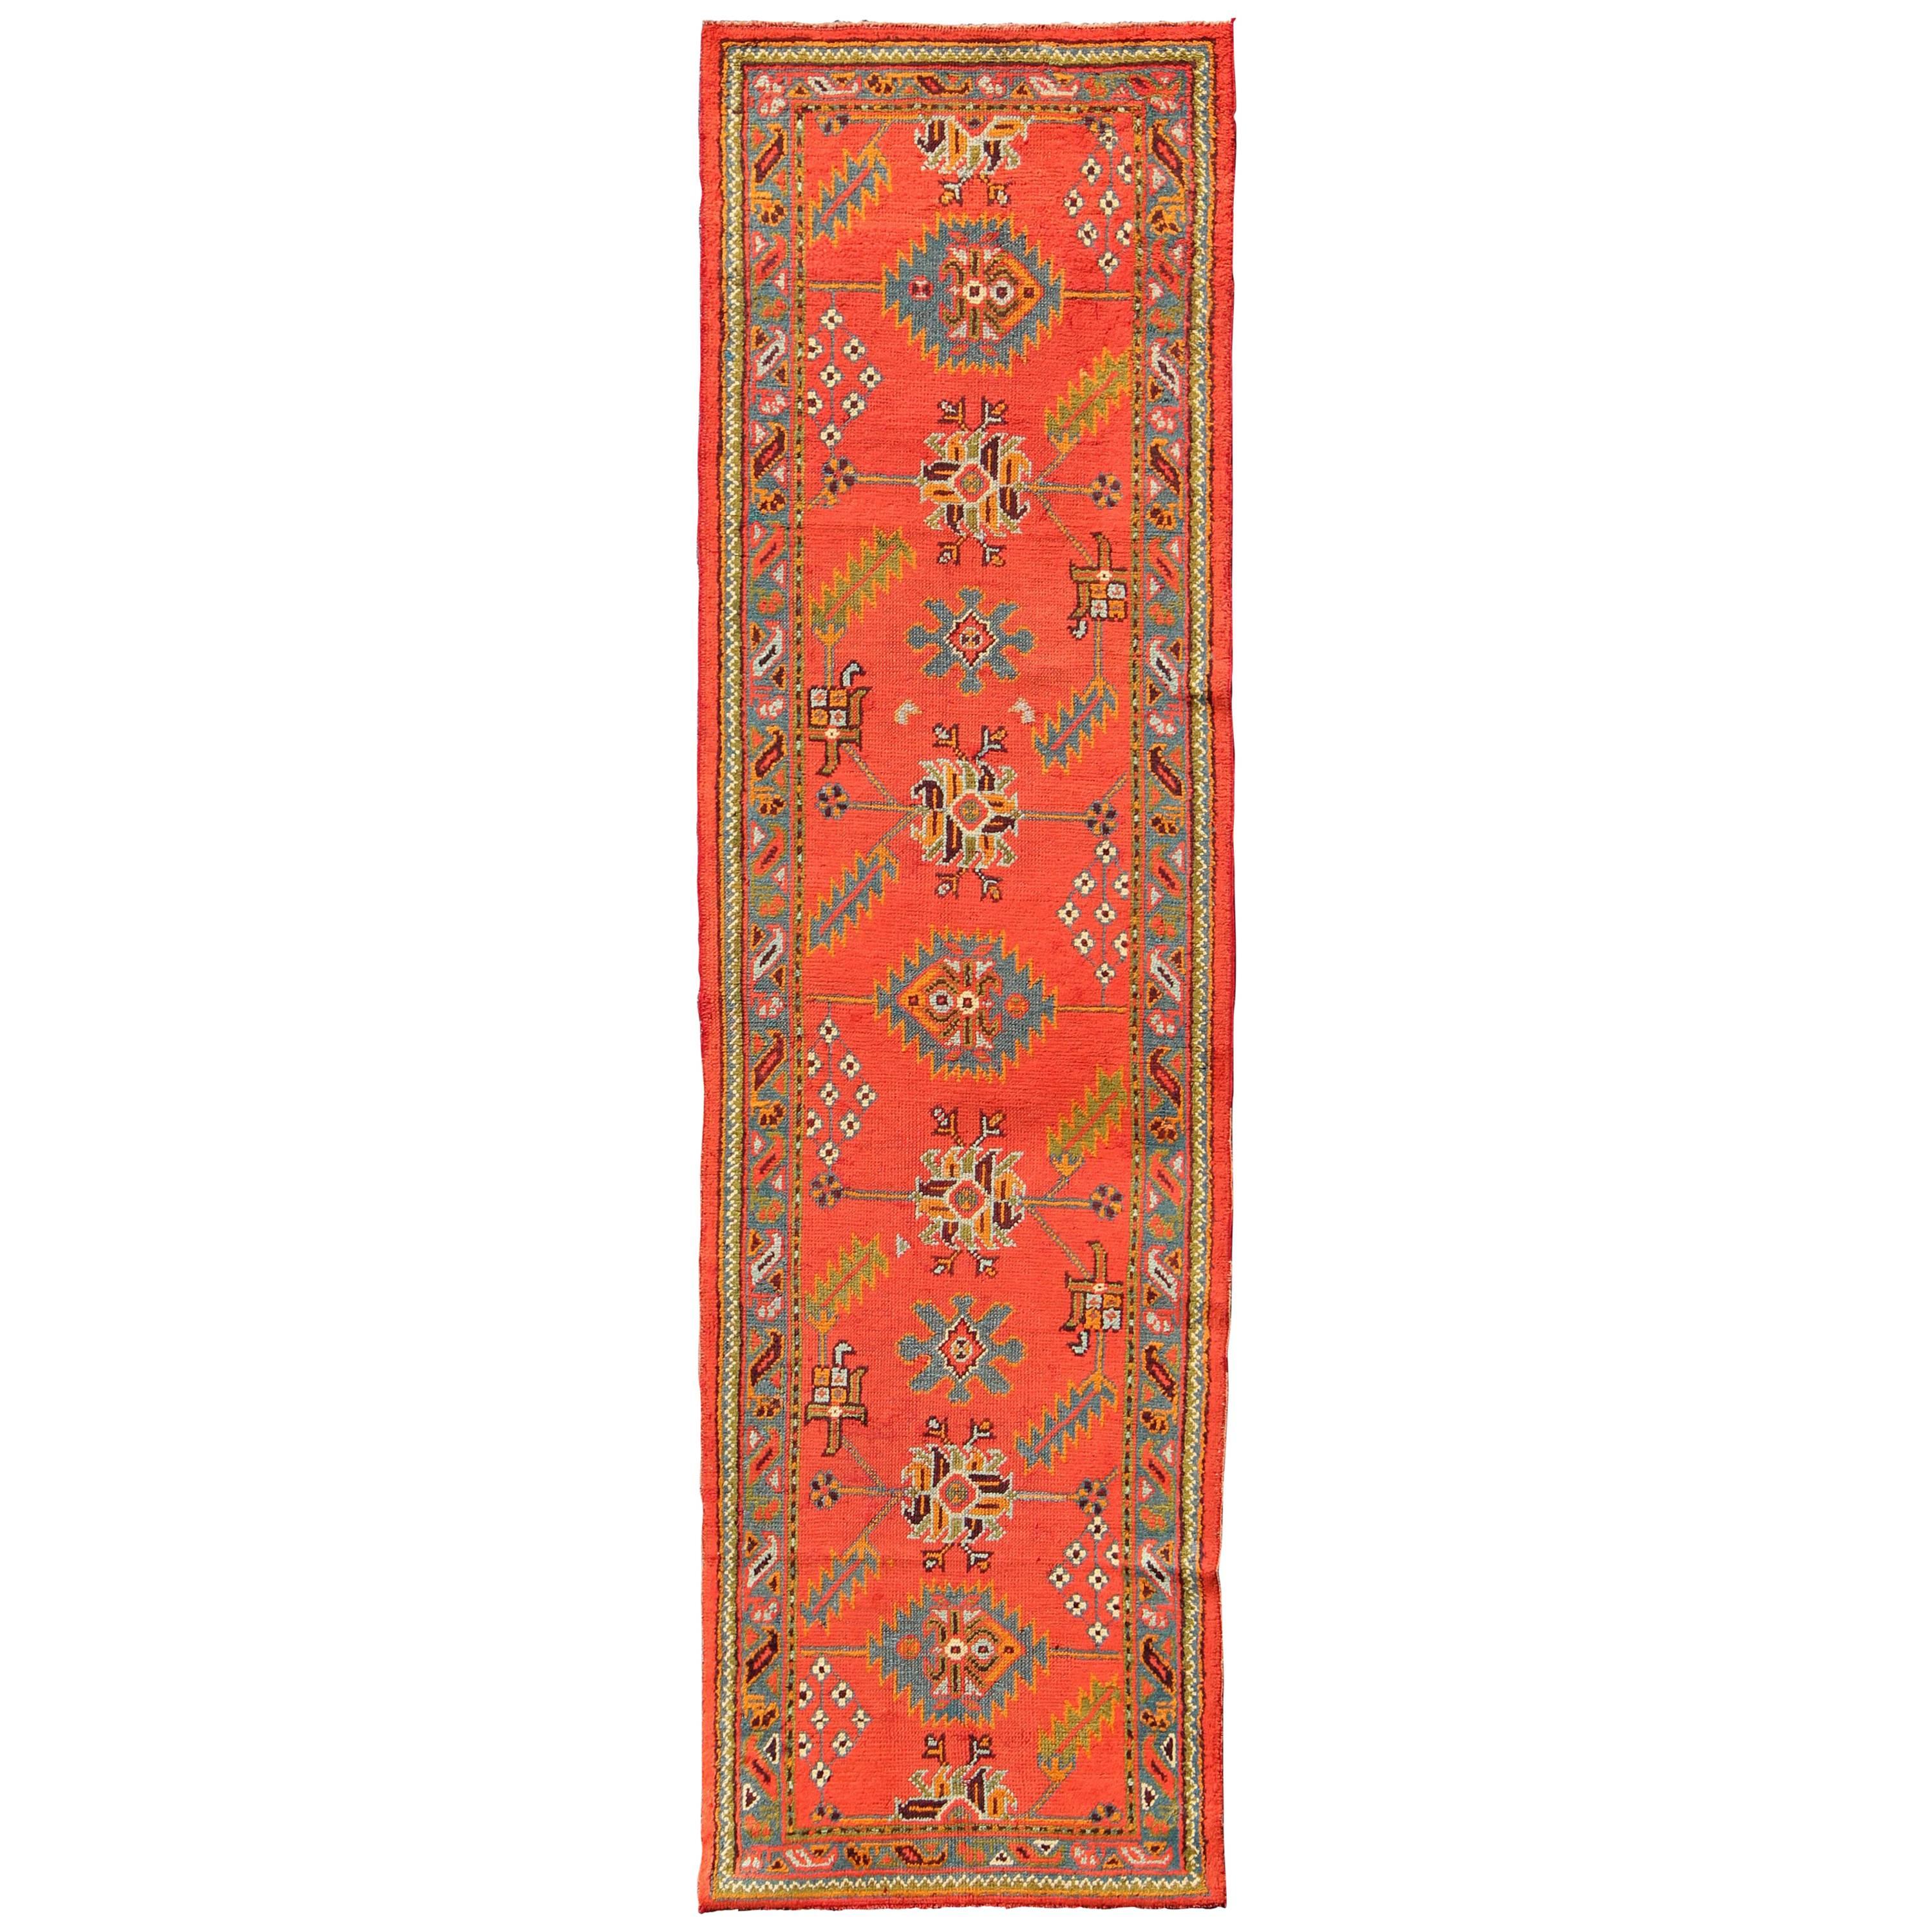 Bright Red Antique Turkish Oushak Runner with Sub-Geometric Tribal Motifs